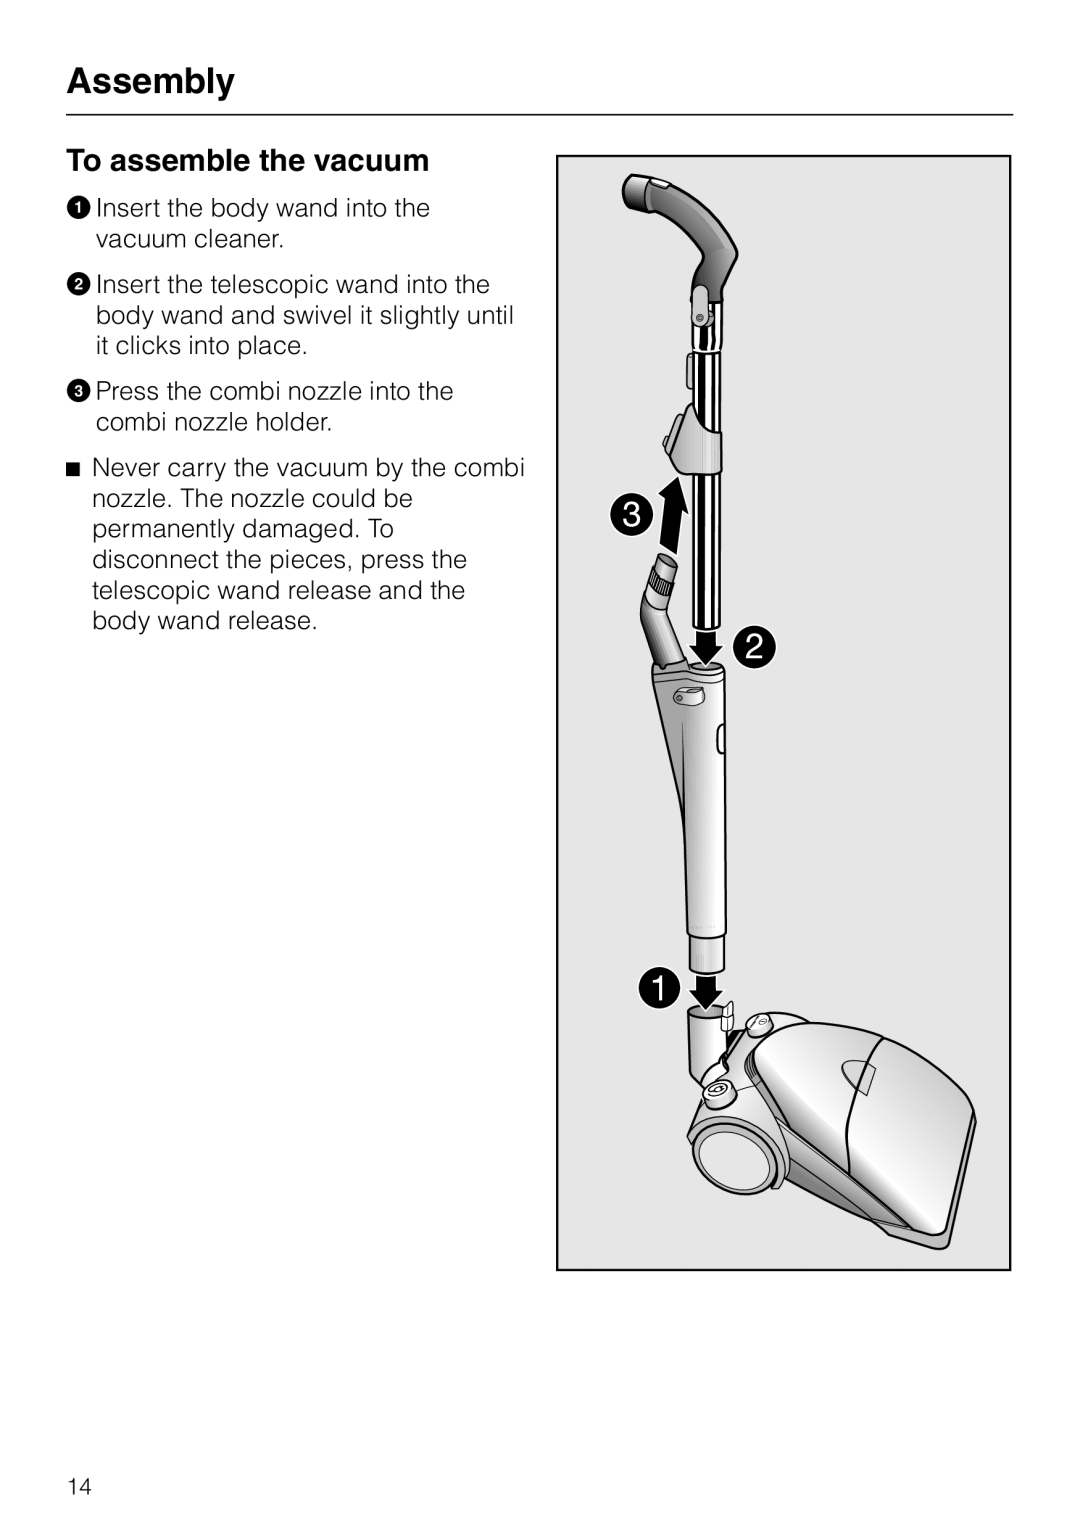 Miele HS09 operating instructions Assembly, To assemble the vacuum 